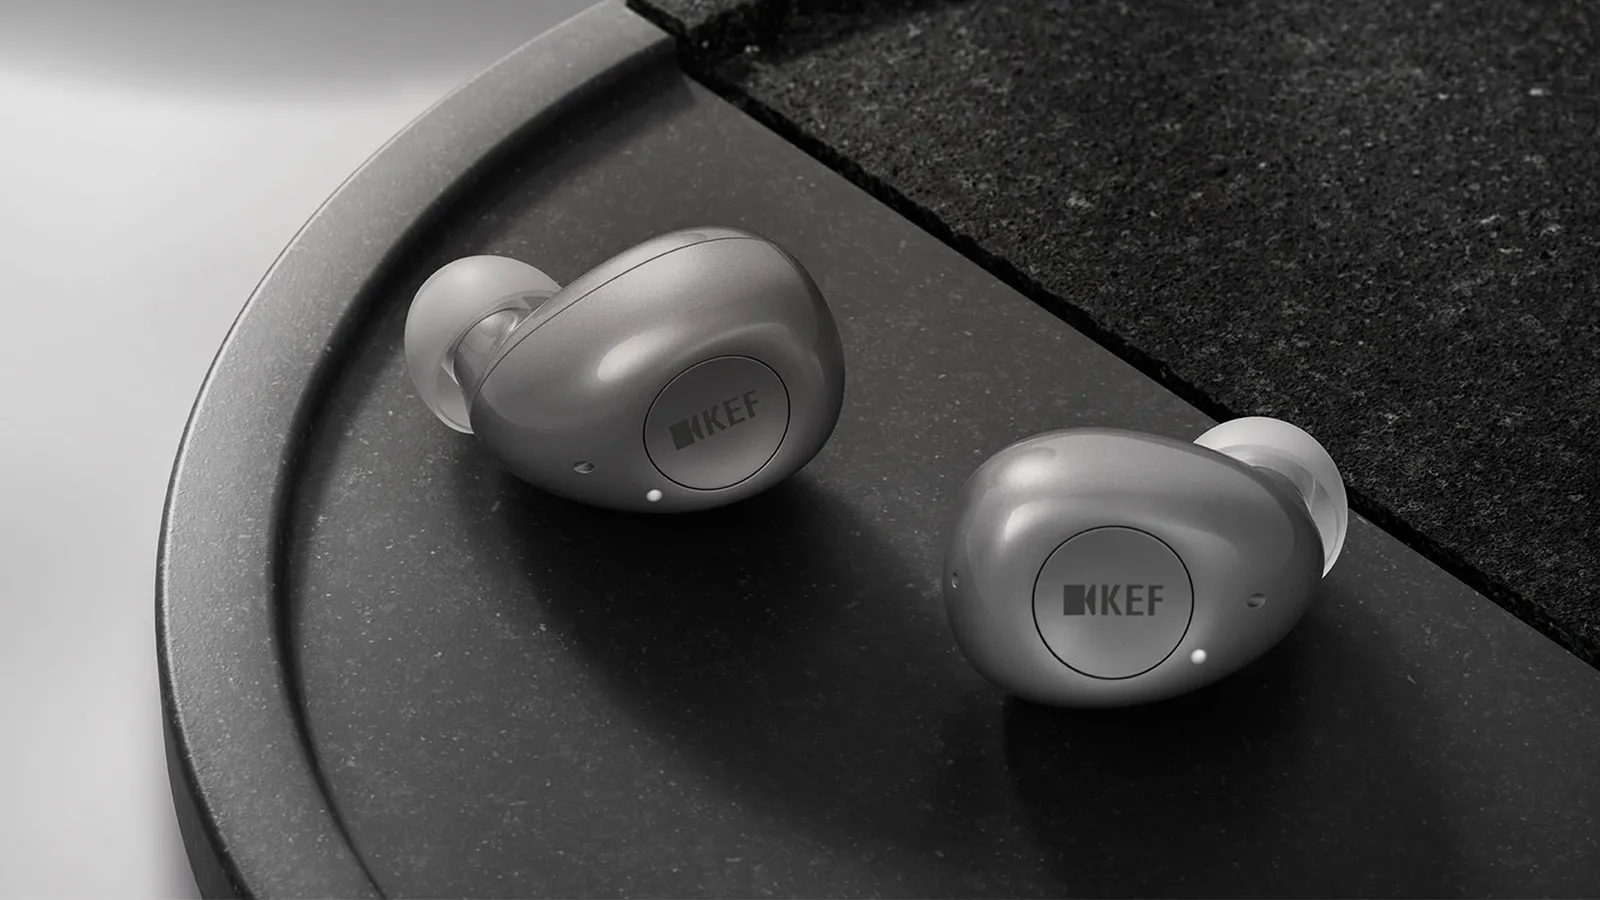 Kef Launched Mu3 True Wireless Kef Earbuds with Active Noise Canceling Feature